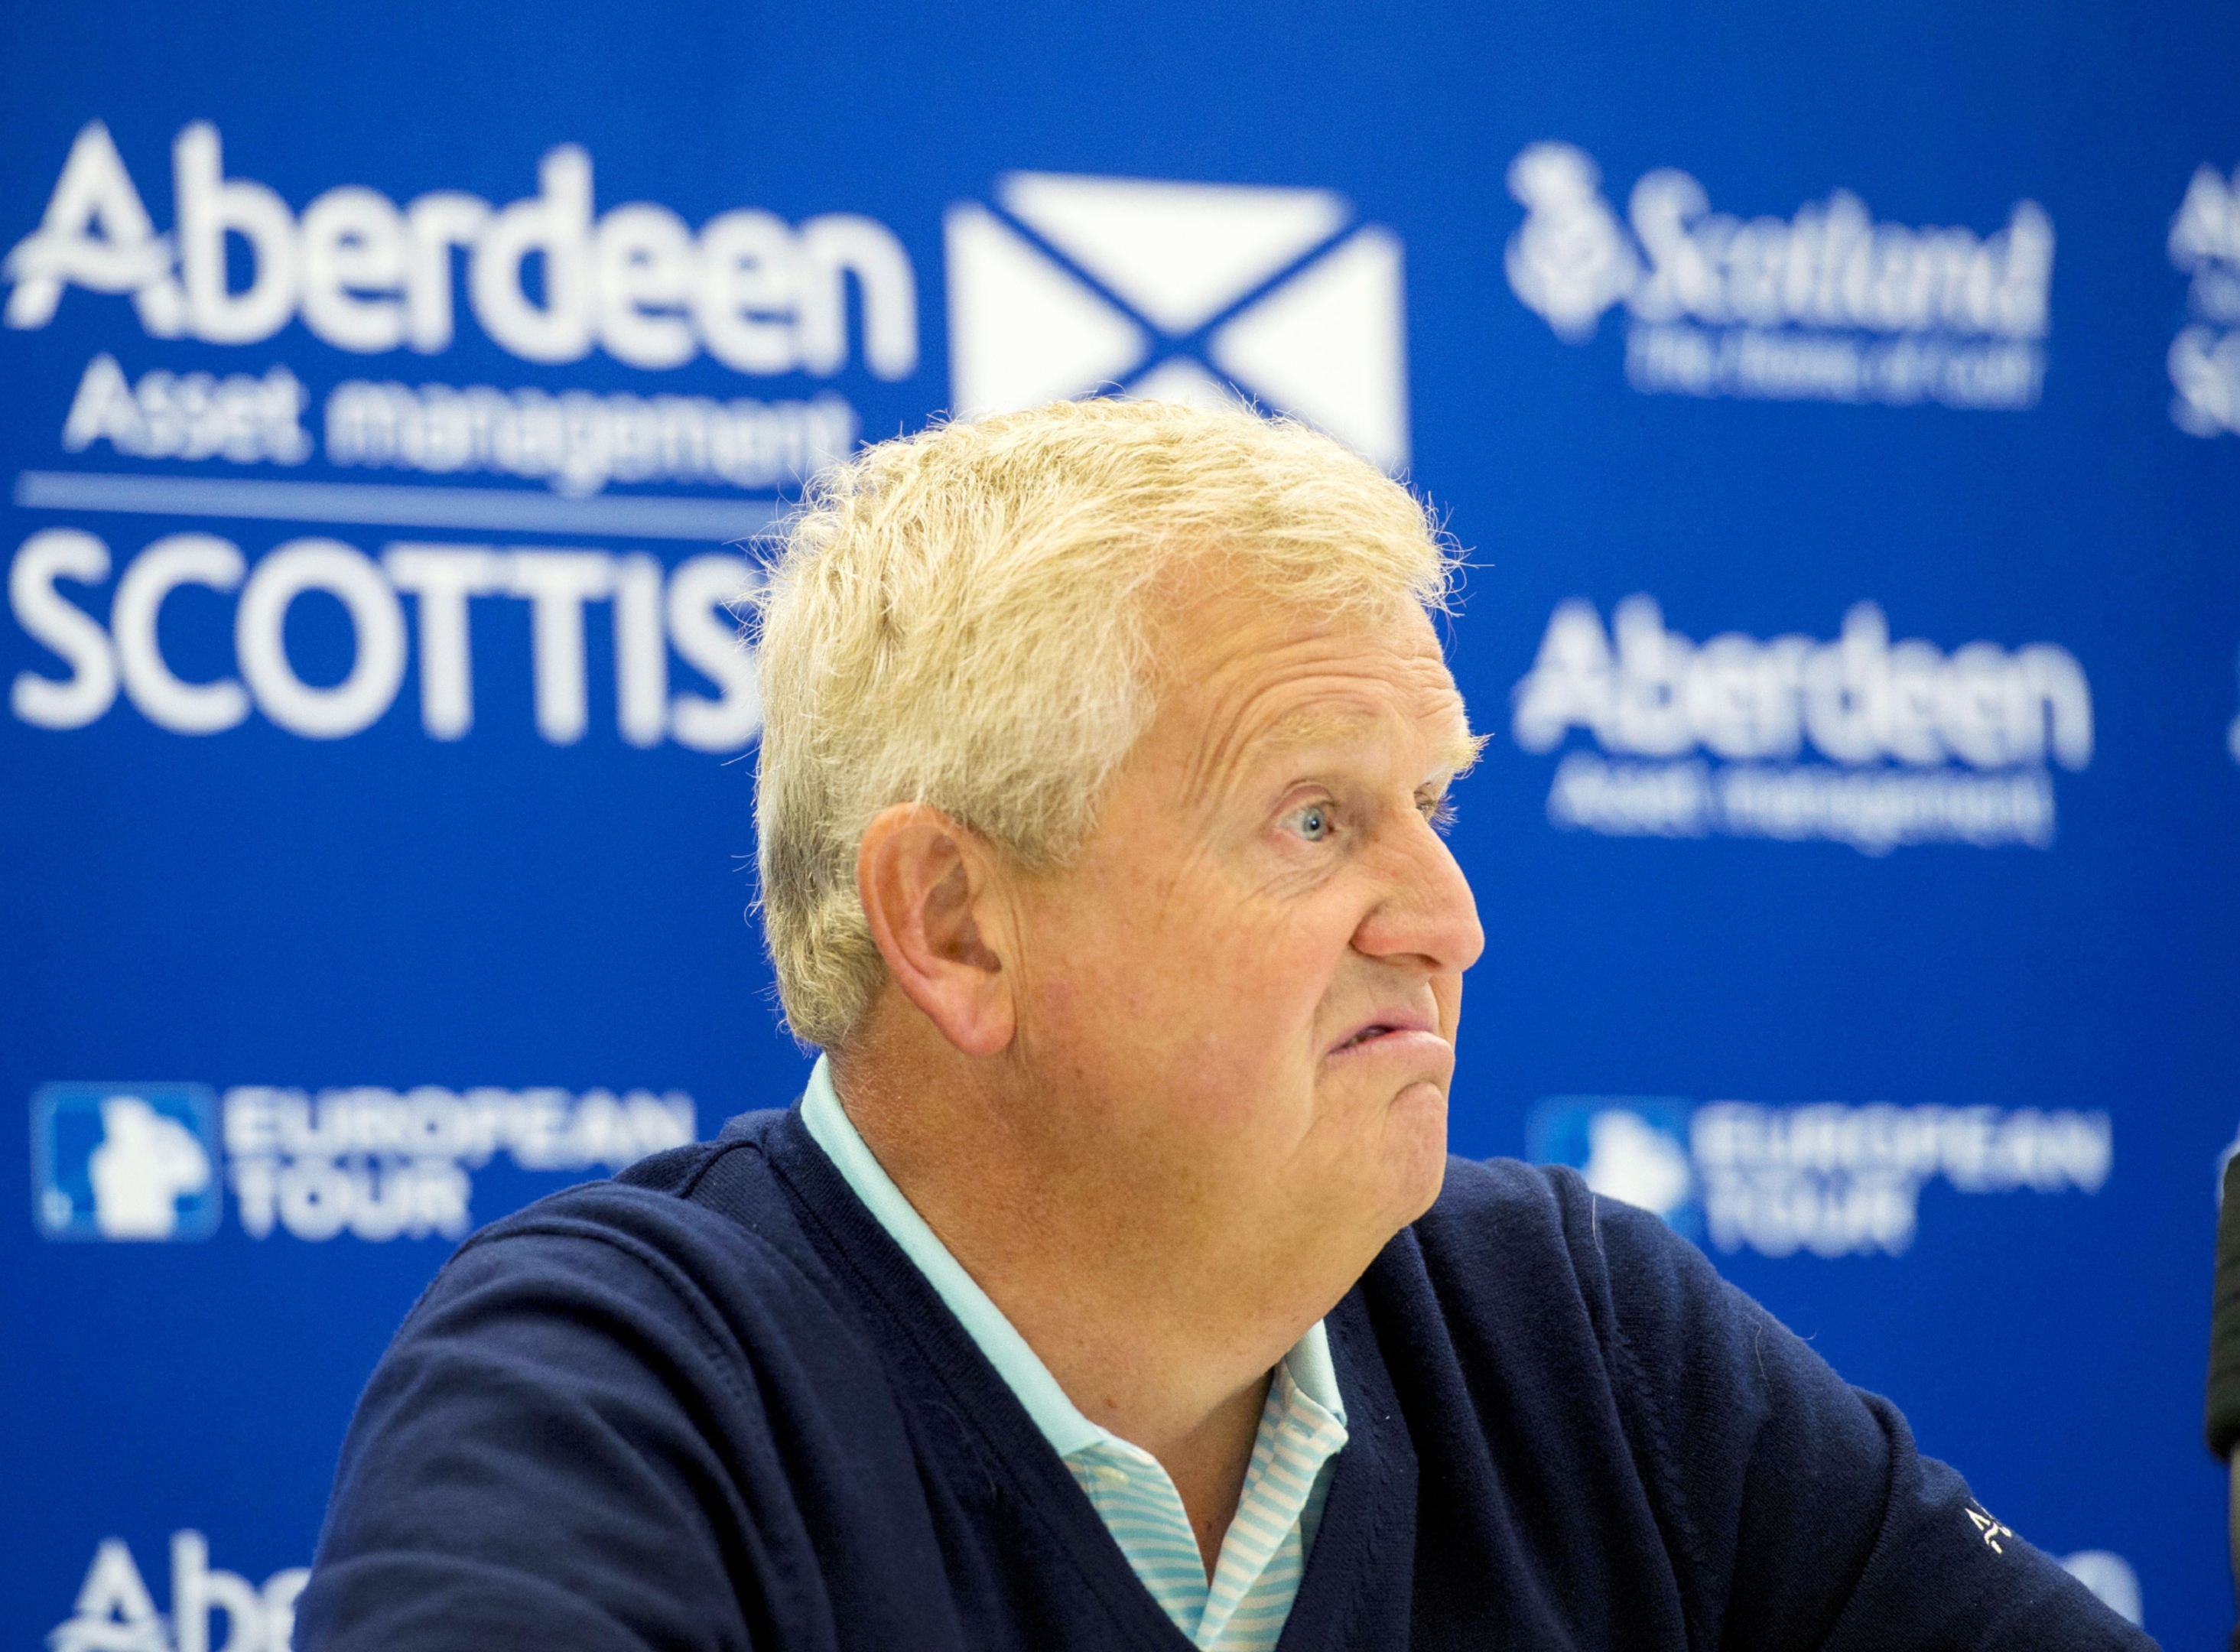 Colin Montgomerie is realistic about his chances on the main tour at 53.